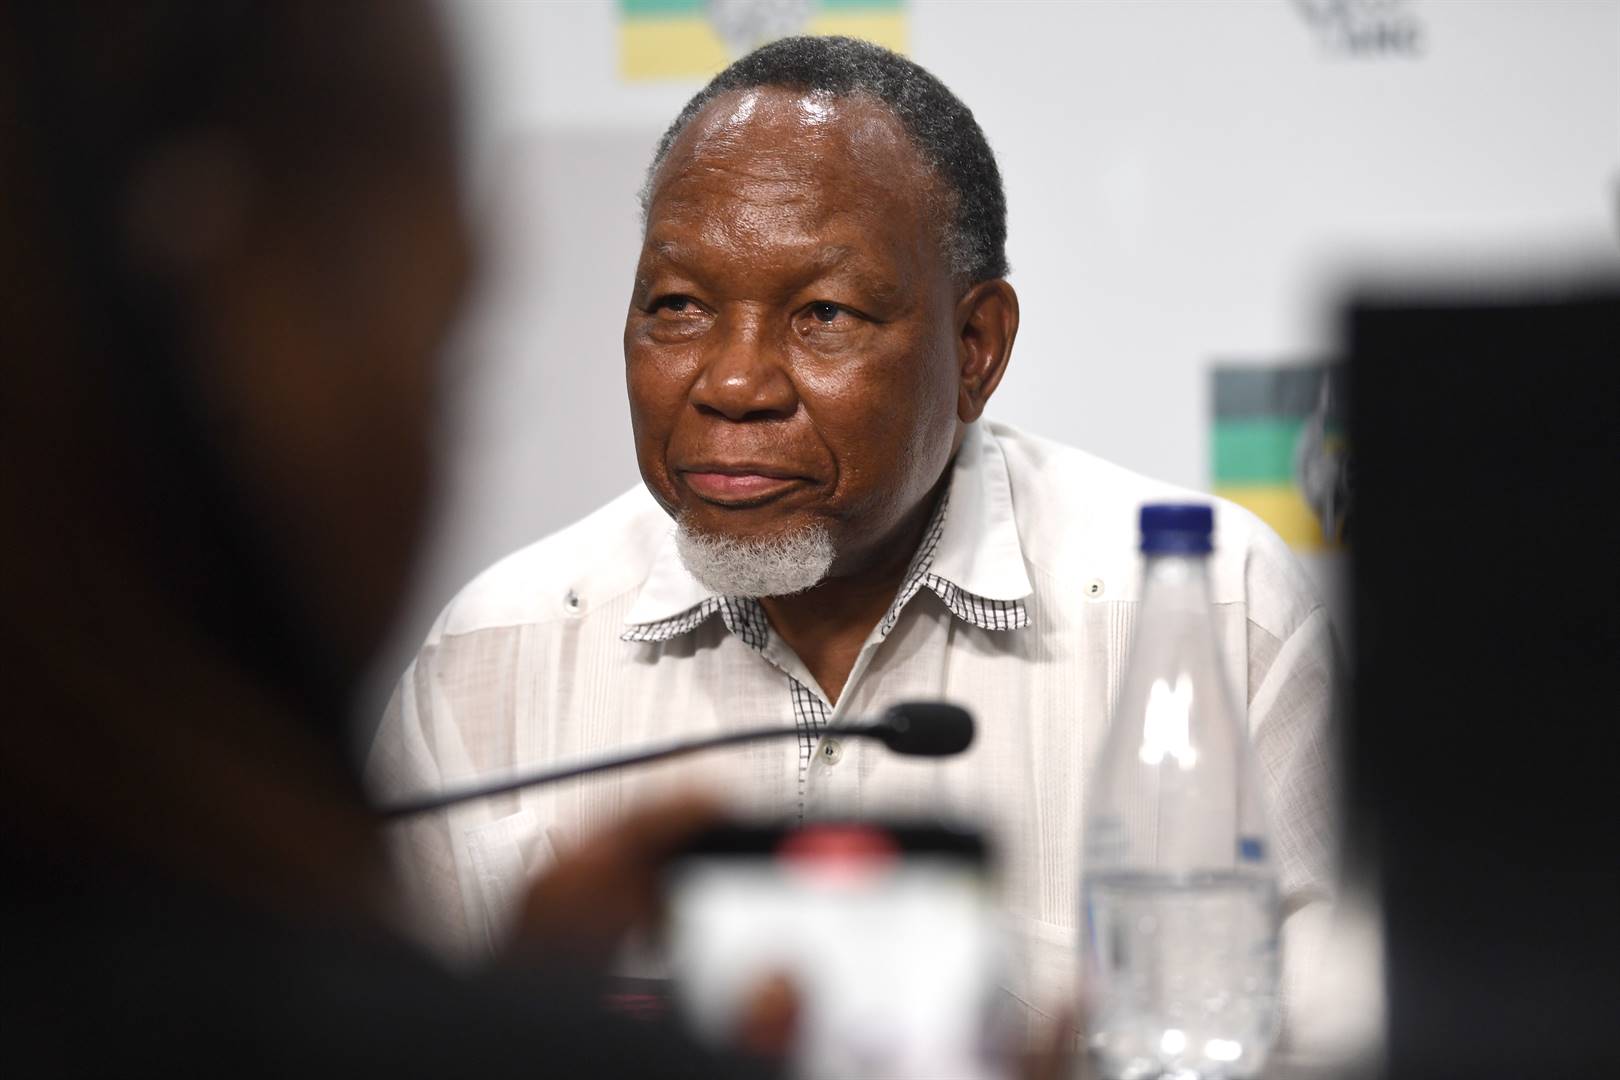 ANC electoral committee chairperson Kgalema Motlanthe. Photo: Melinda Stuurman